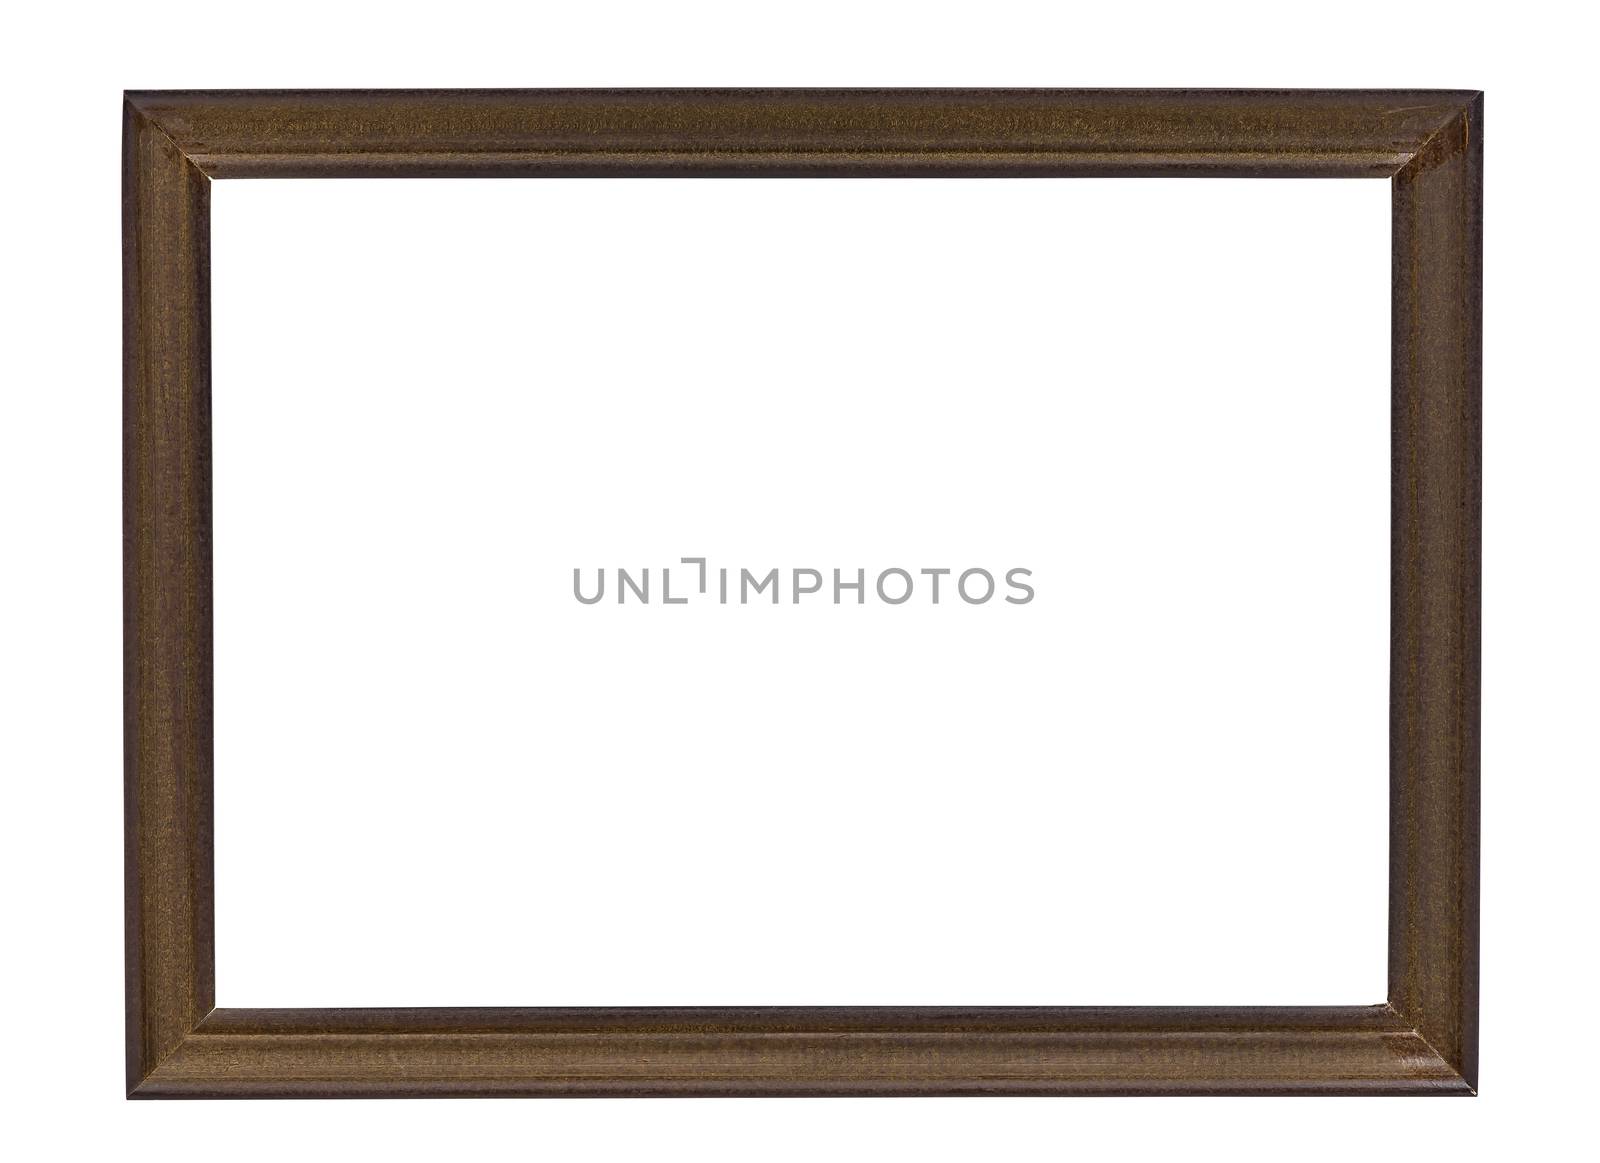 Brown wooden picture frame on white background by mkos83